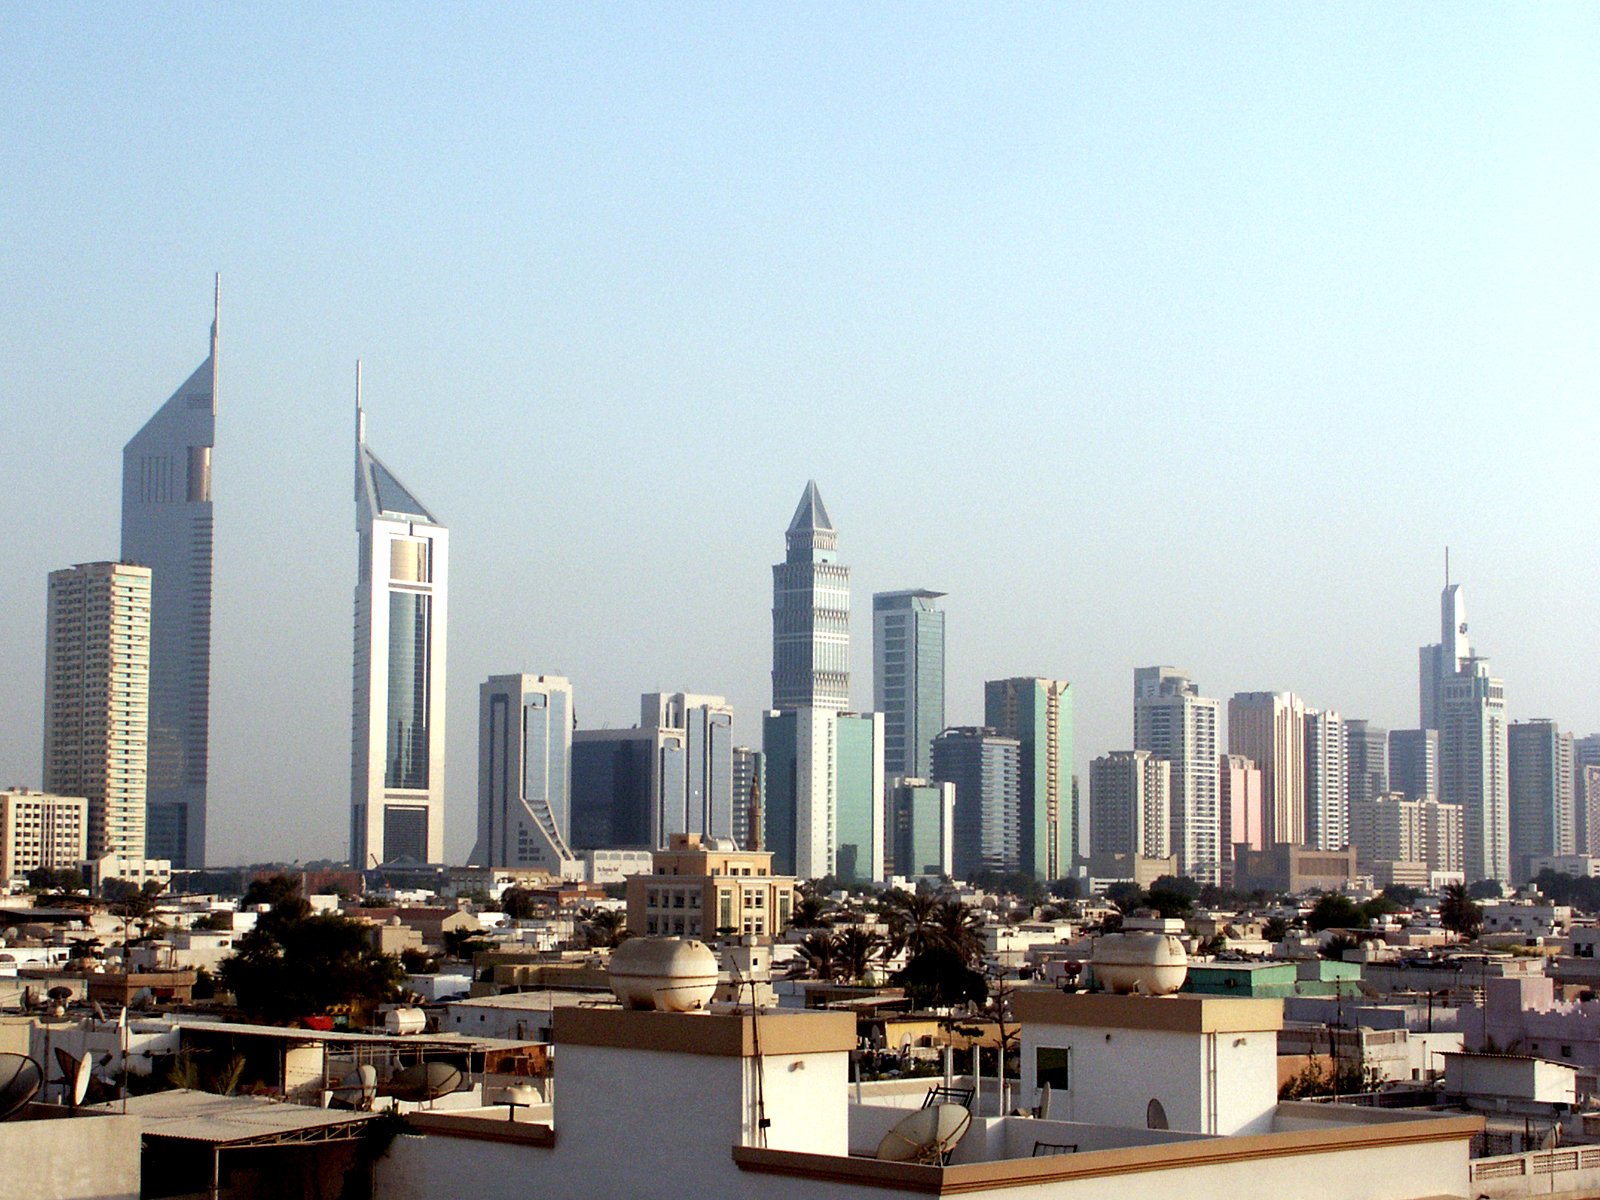 skyline of buildings in business district with tall tower blocks